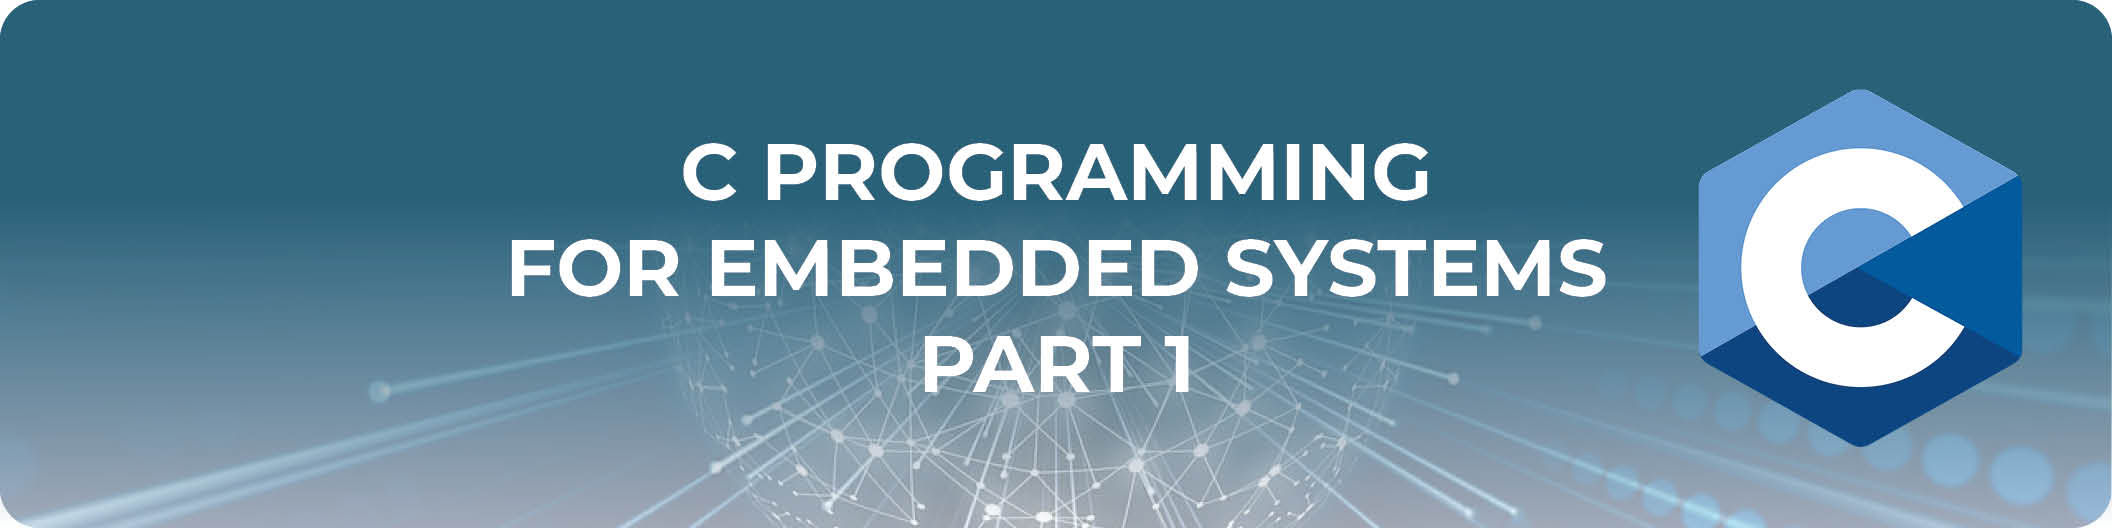 C PROGRAMMING FOR EMBEDDED SYSTEMS, PART 1